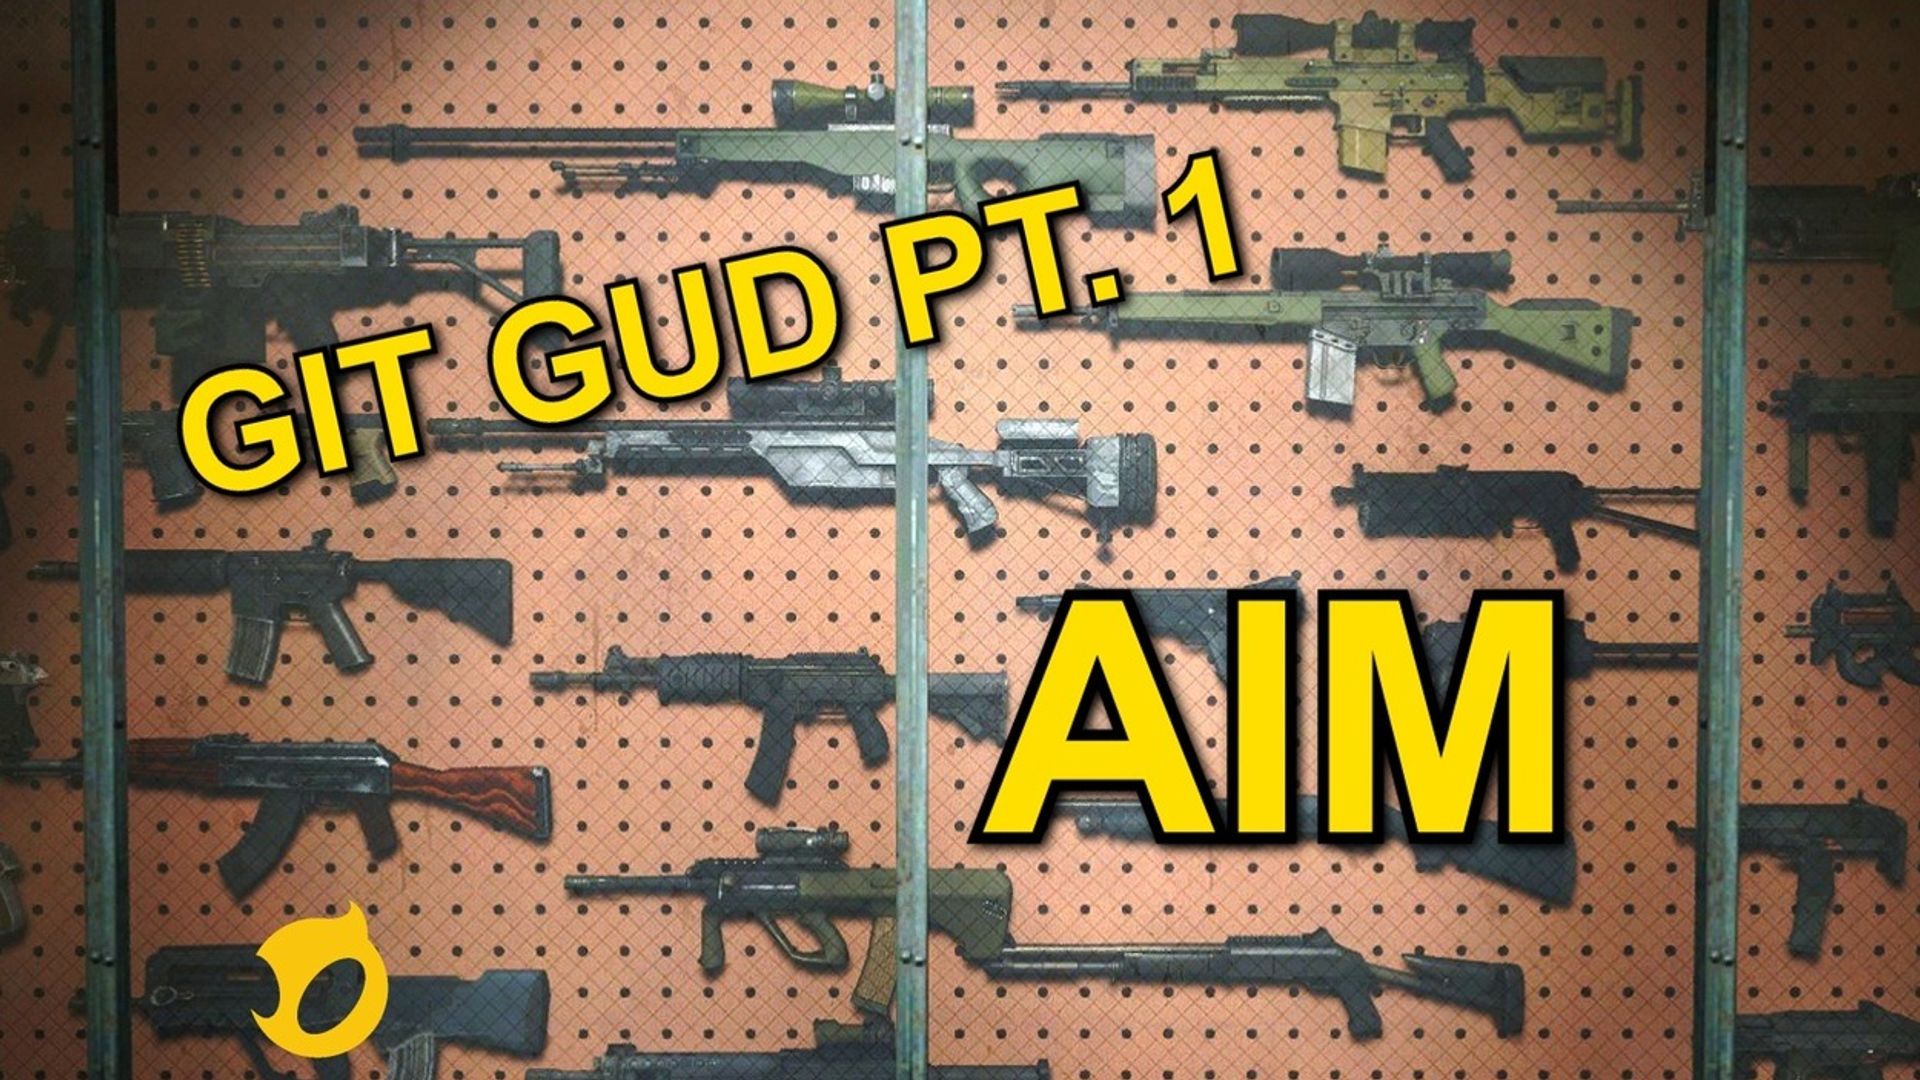 The Ultimate Guide to getting good: Aim